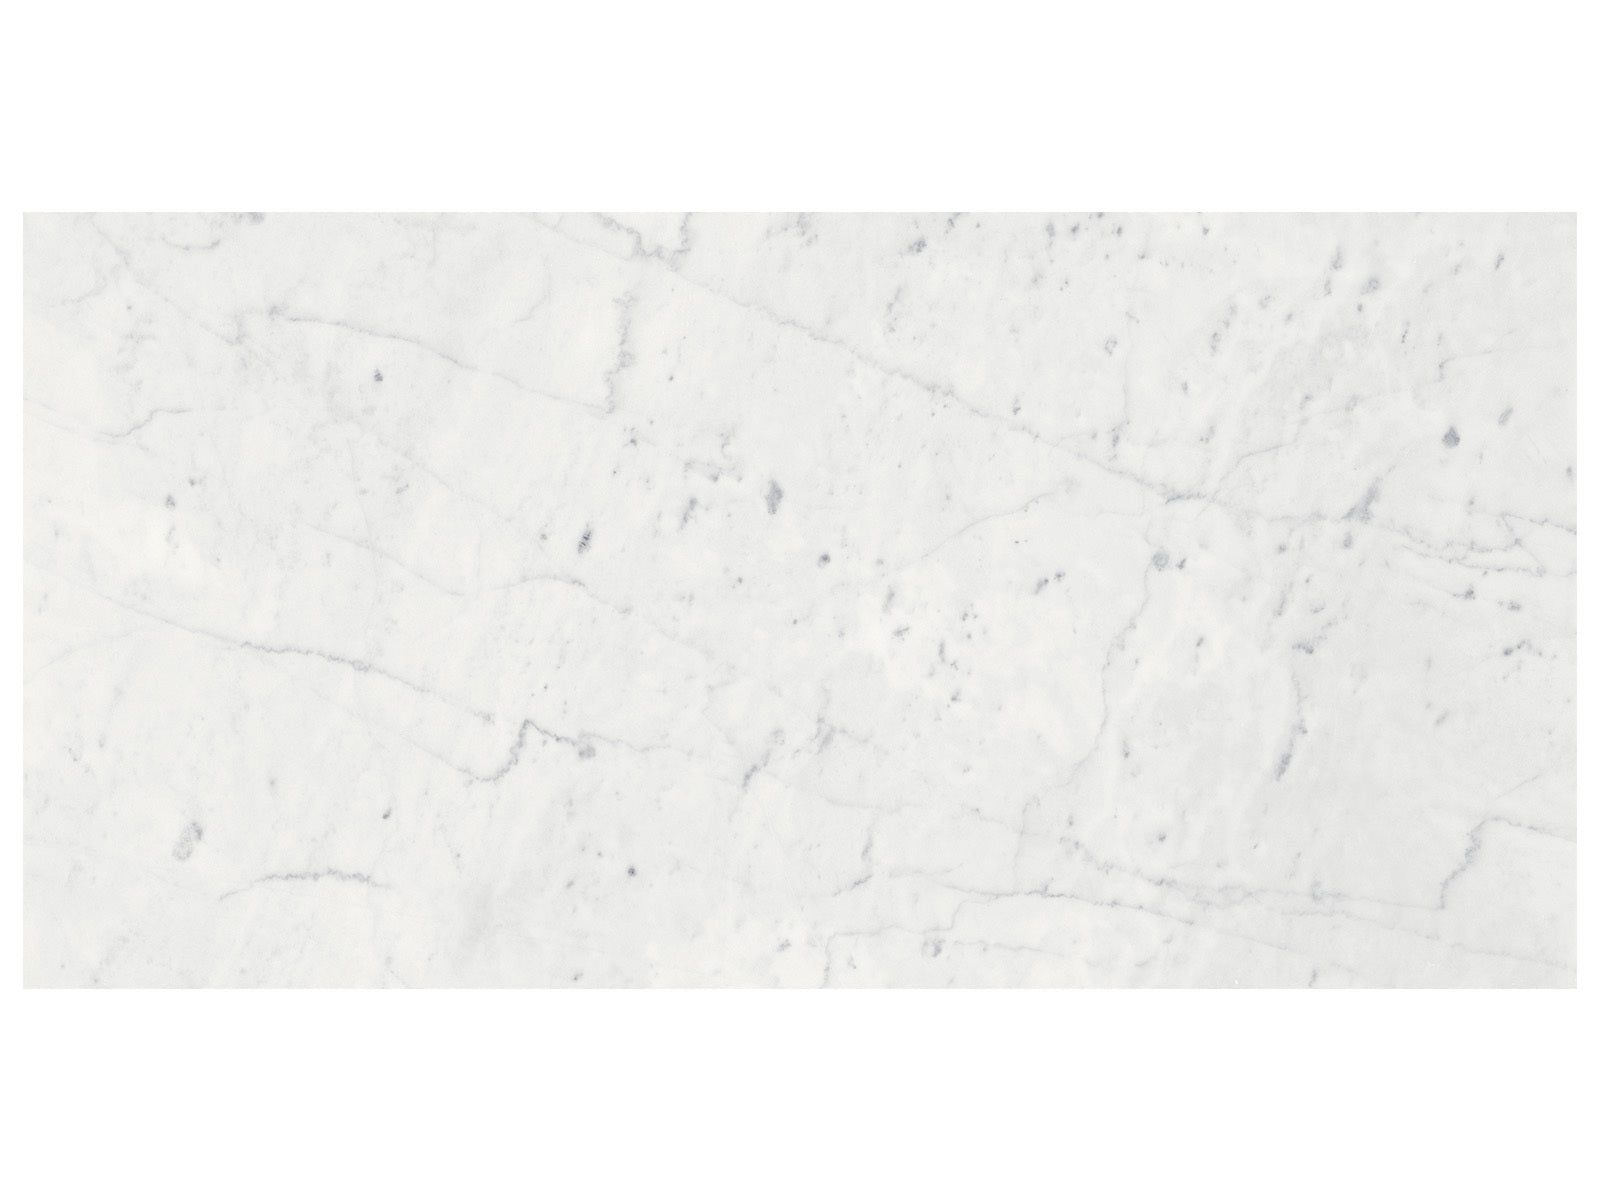 anatolia marble eterna bianco natural stone field tile polished straight edge rectangle 12x24 sold by surface group international